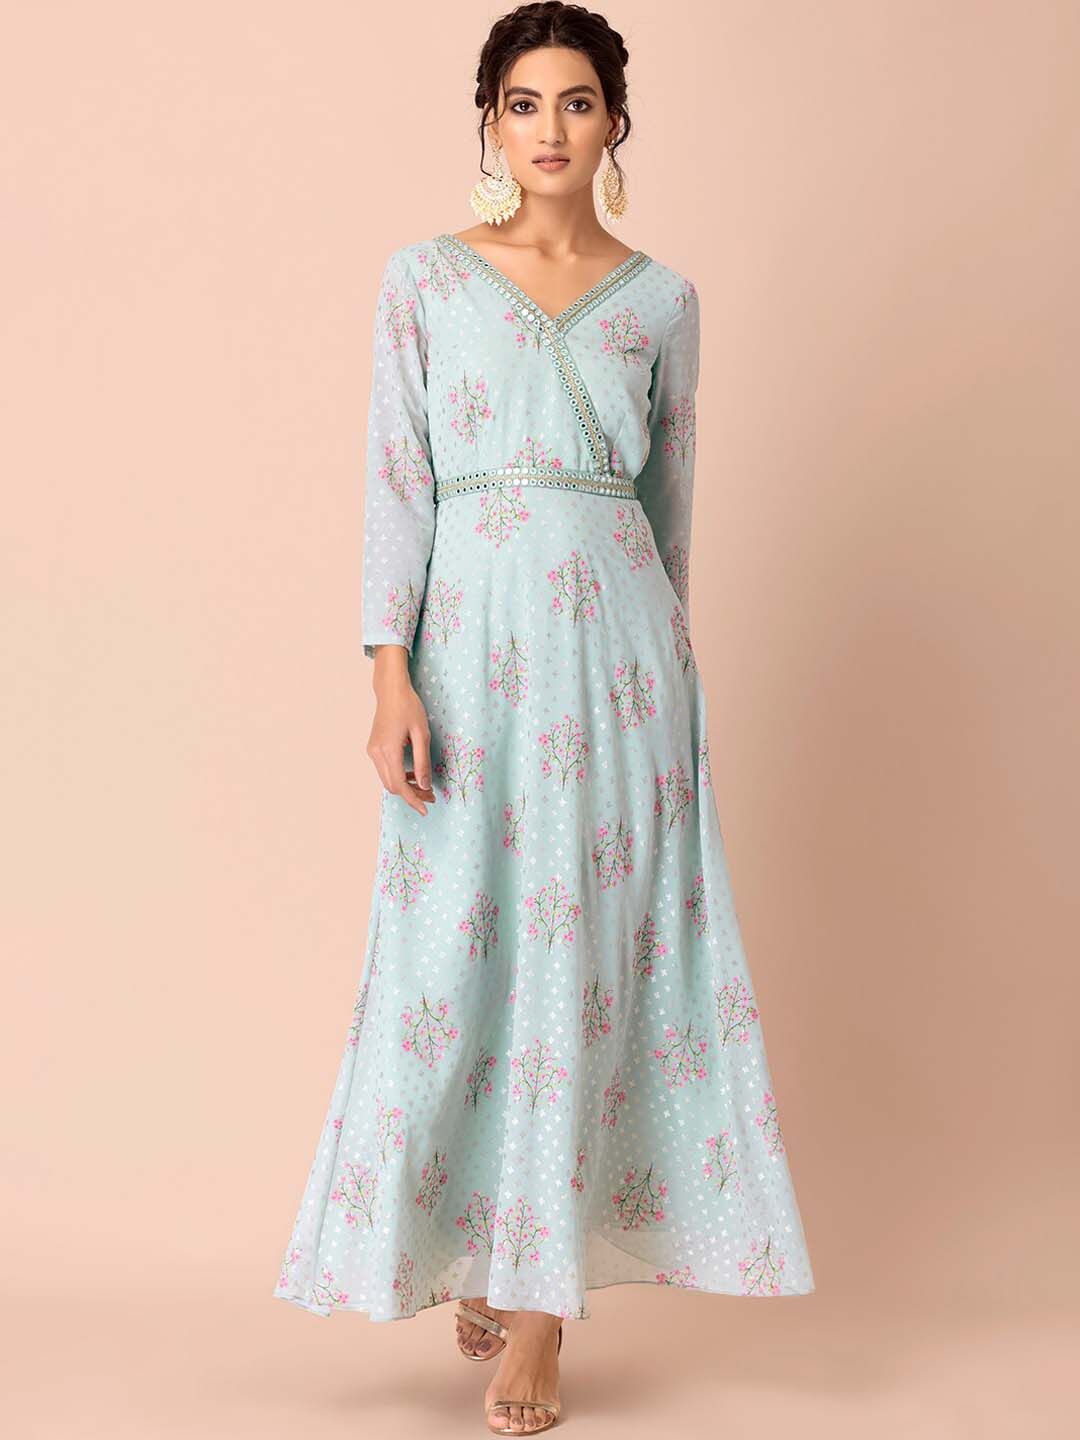 INDYA Blue Floral Ethnic A-Line Maxi Dress Price in India